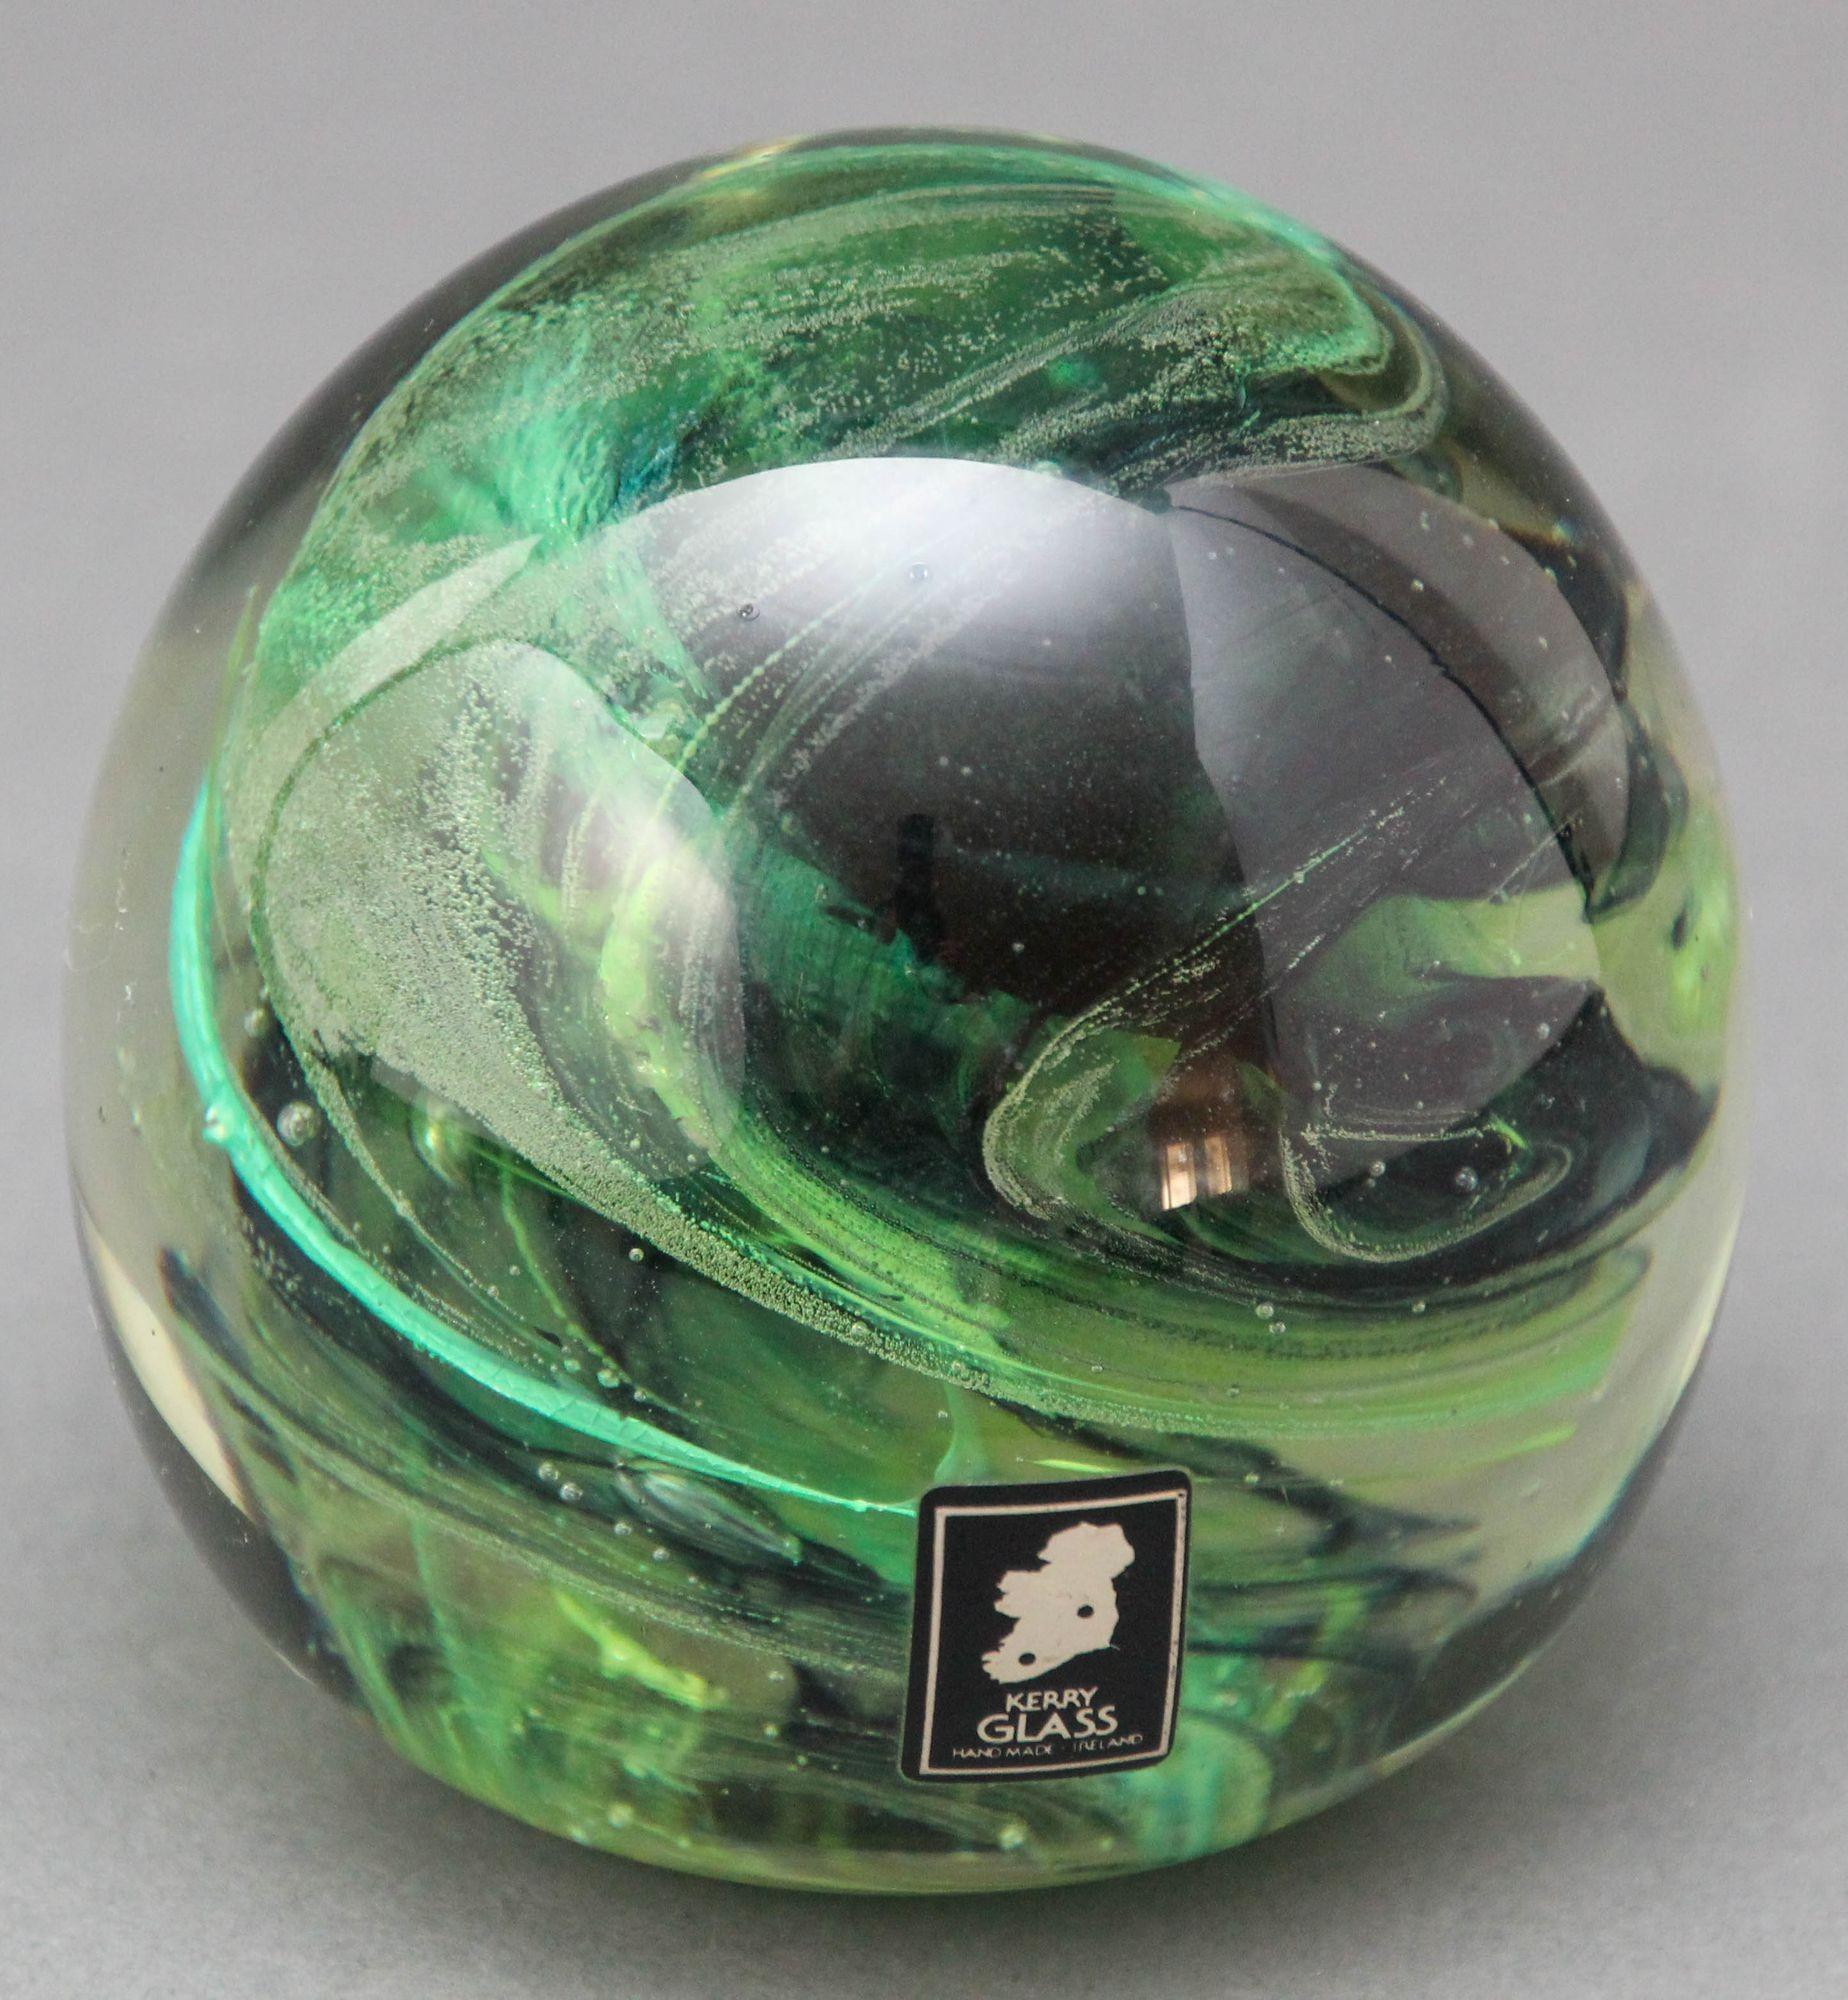 Vintage Kerry art glass paperweight hand blown in dark olive green, jade and emerald colors with small bubbles.
Hand crafted in Ireland, circa 1980s.
Sticker still attached.
Kerry Glass Hand made in Ireland.
Measures: diameter 3 inches, height 3